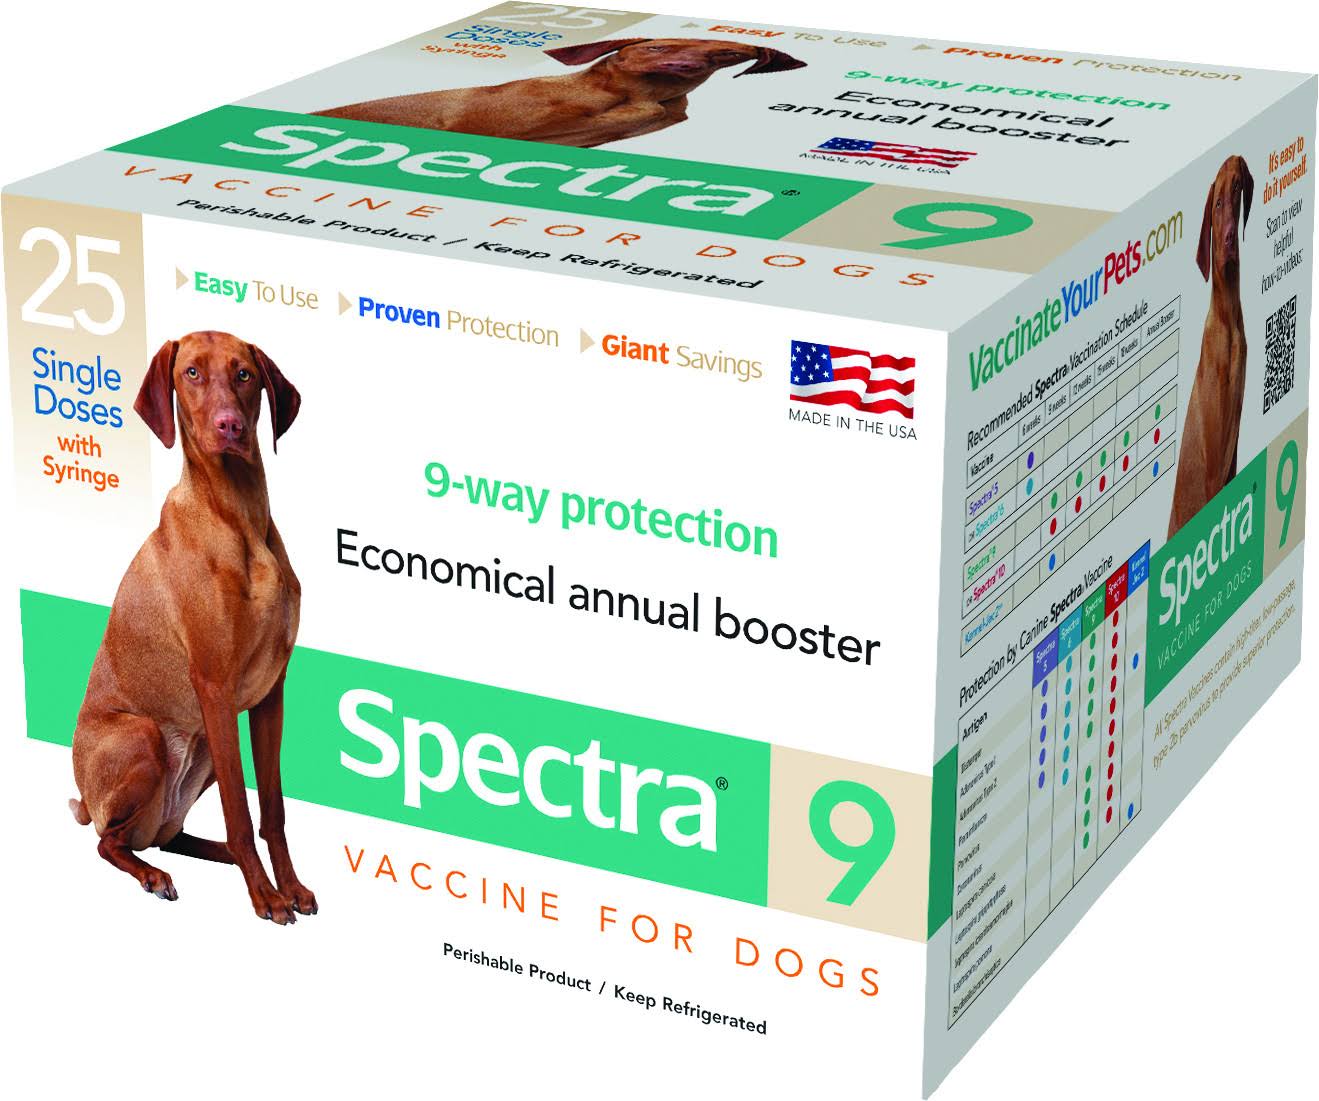 Spectra 9 Dog Vaccine with Syringe - 25 Single Doses